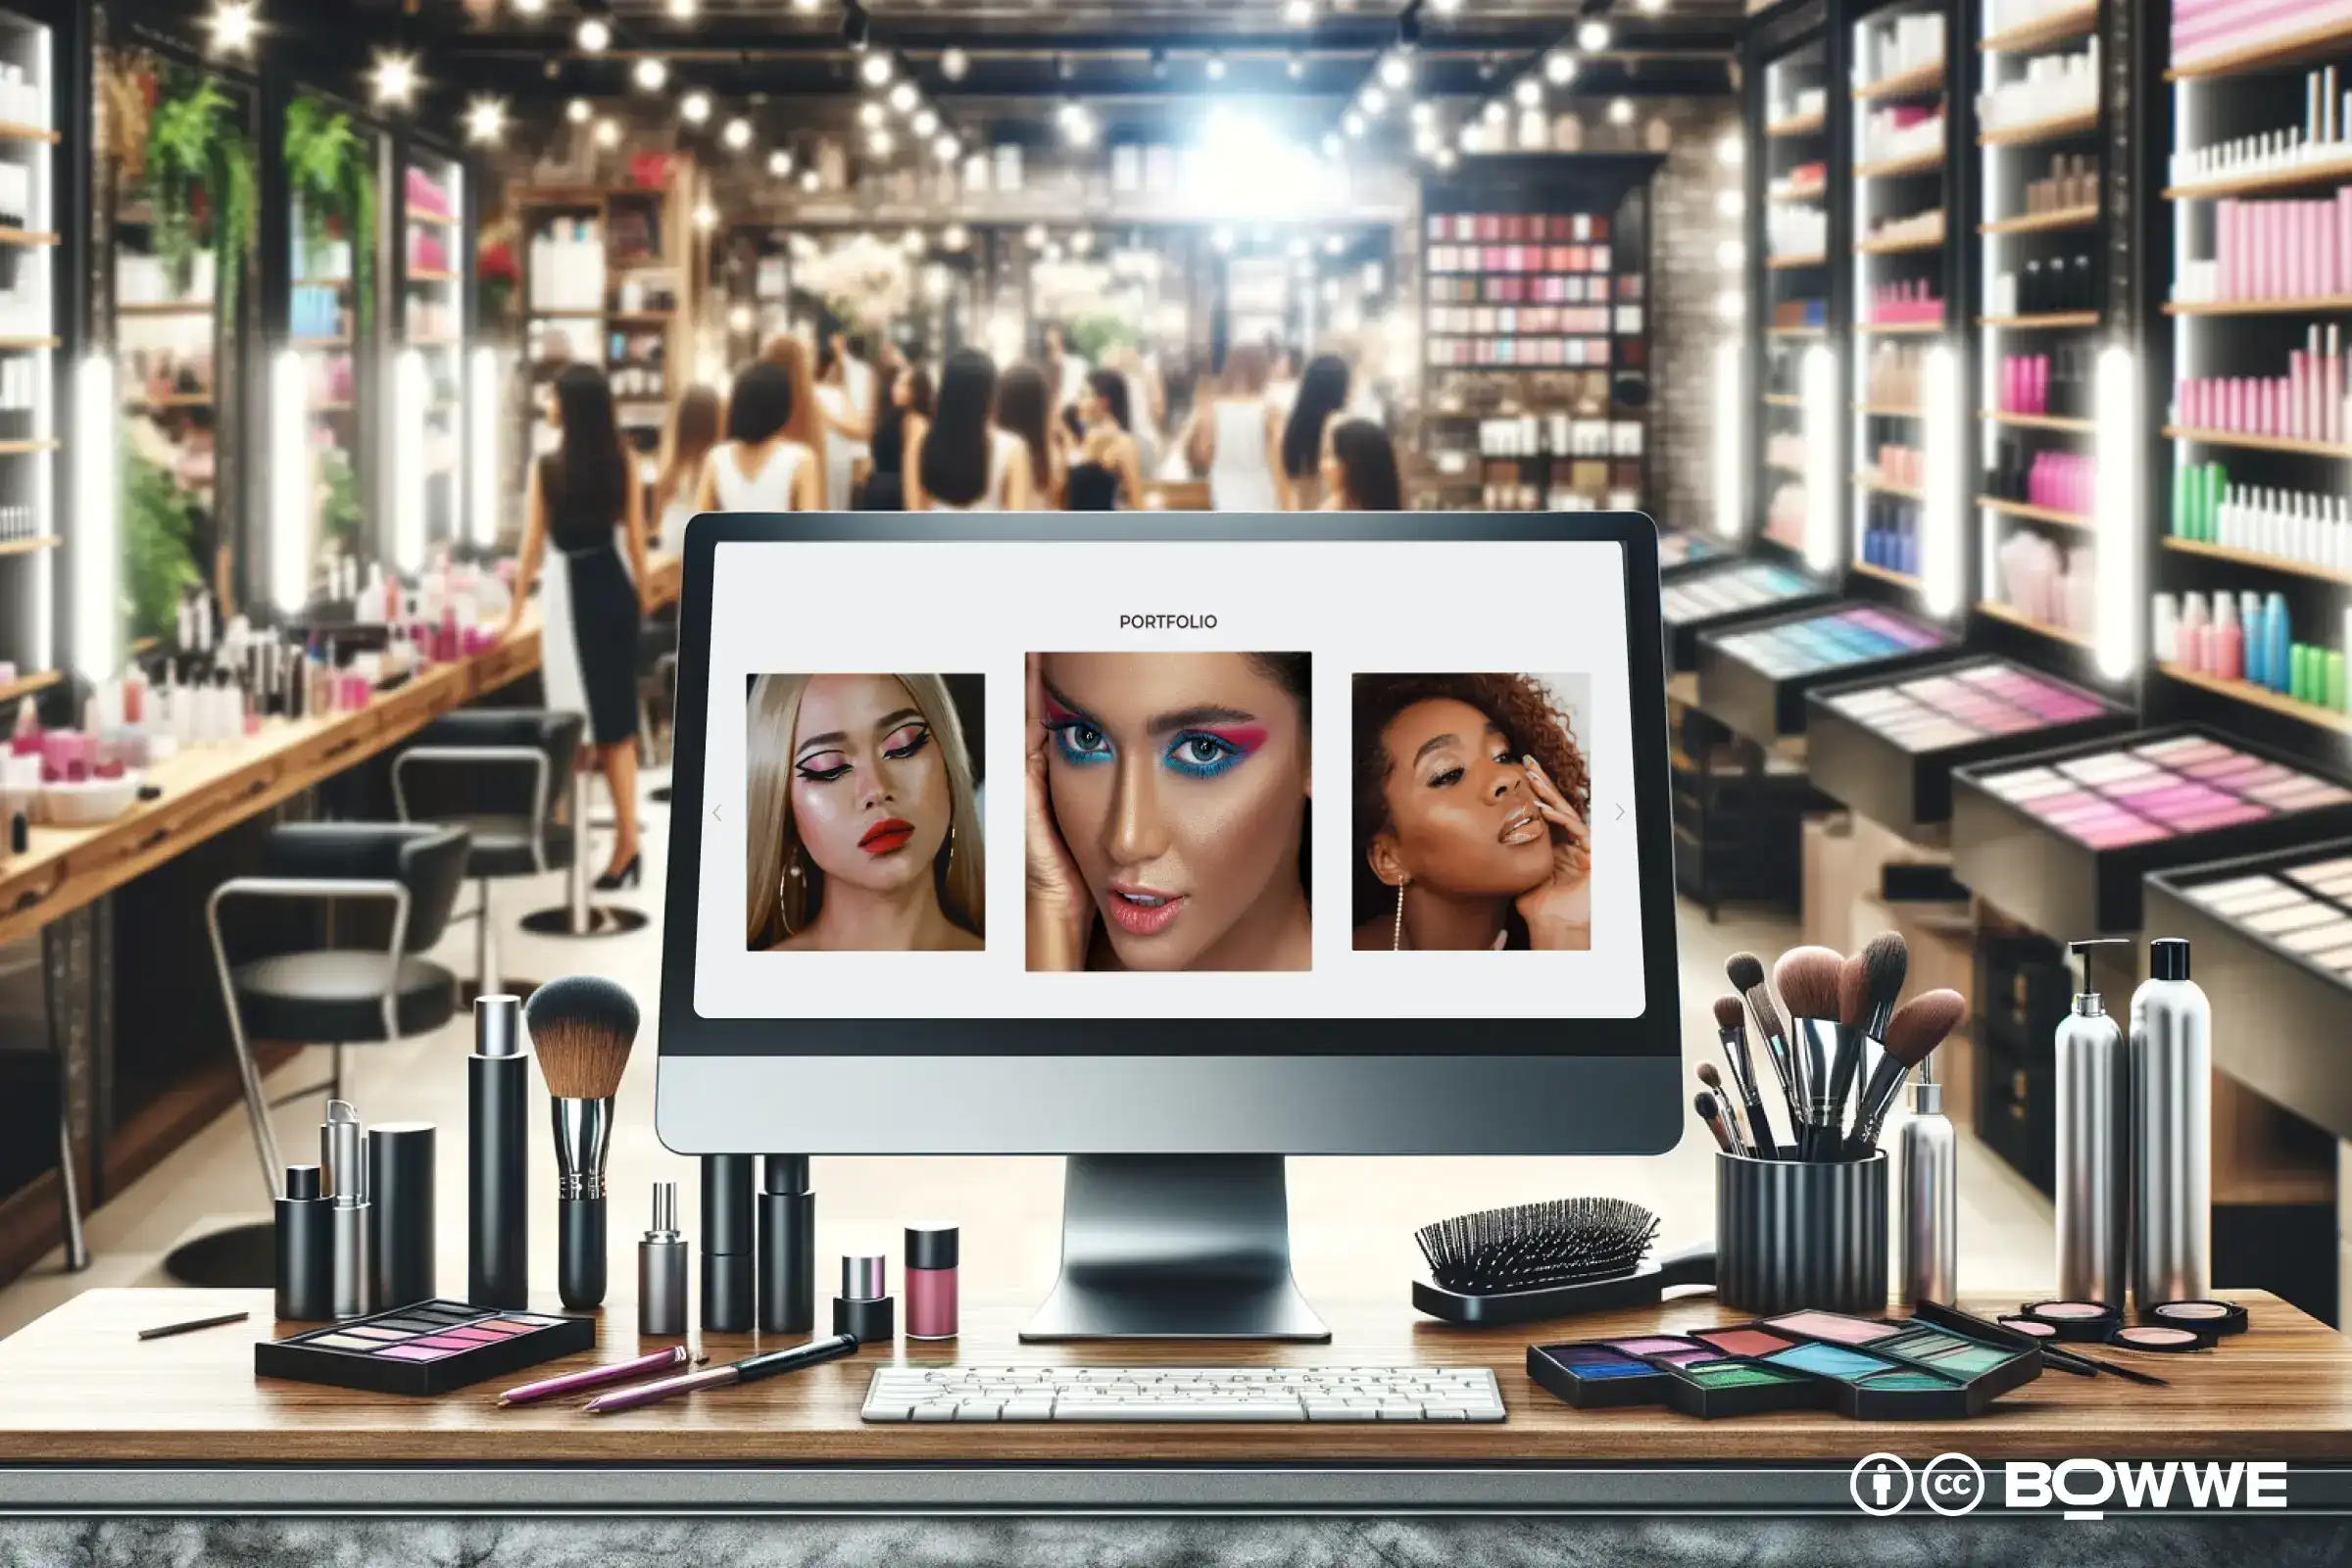 laptop with section with portfolio showing makeups on website templete for makeup salon